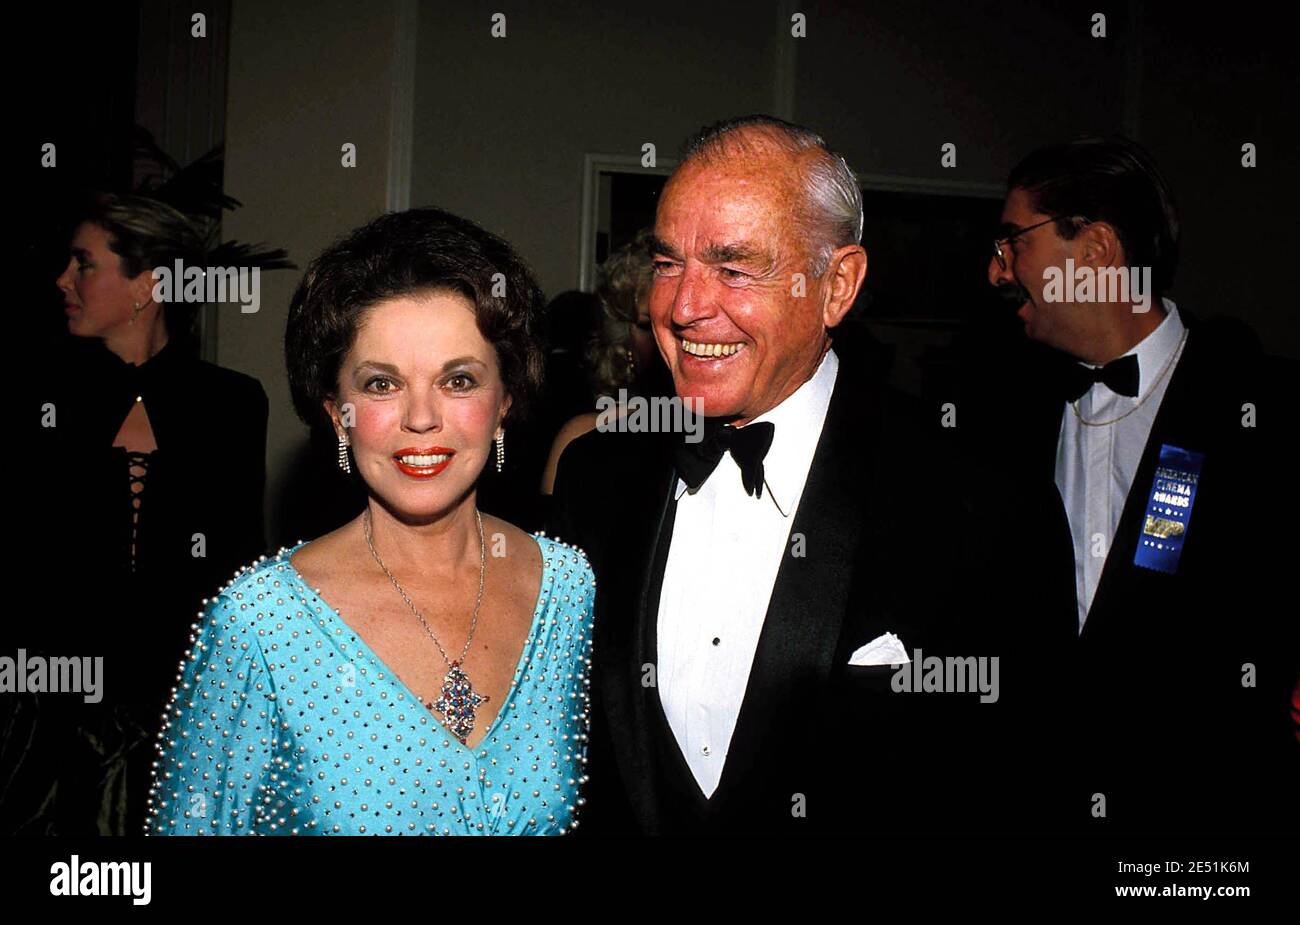 Shirley Temple Black And Charles Black  1988 Credit: Ralph Dominguez/MediaPunch Stock Photo